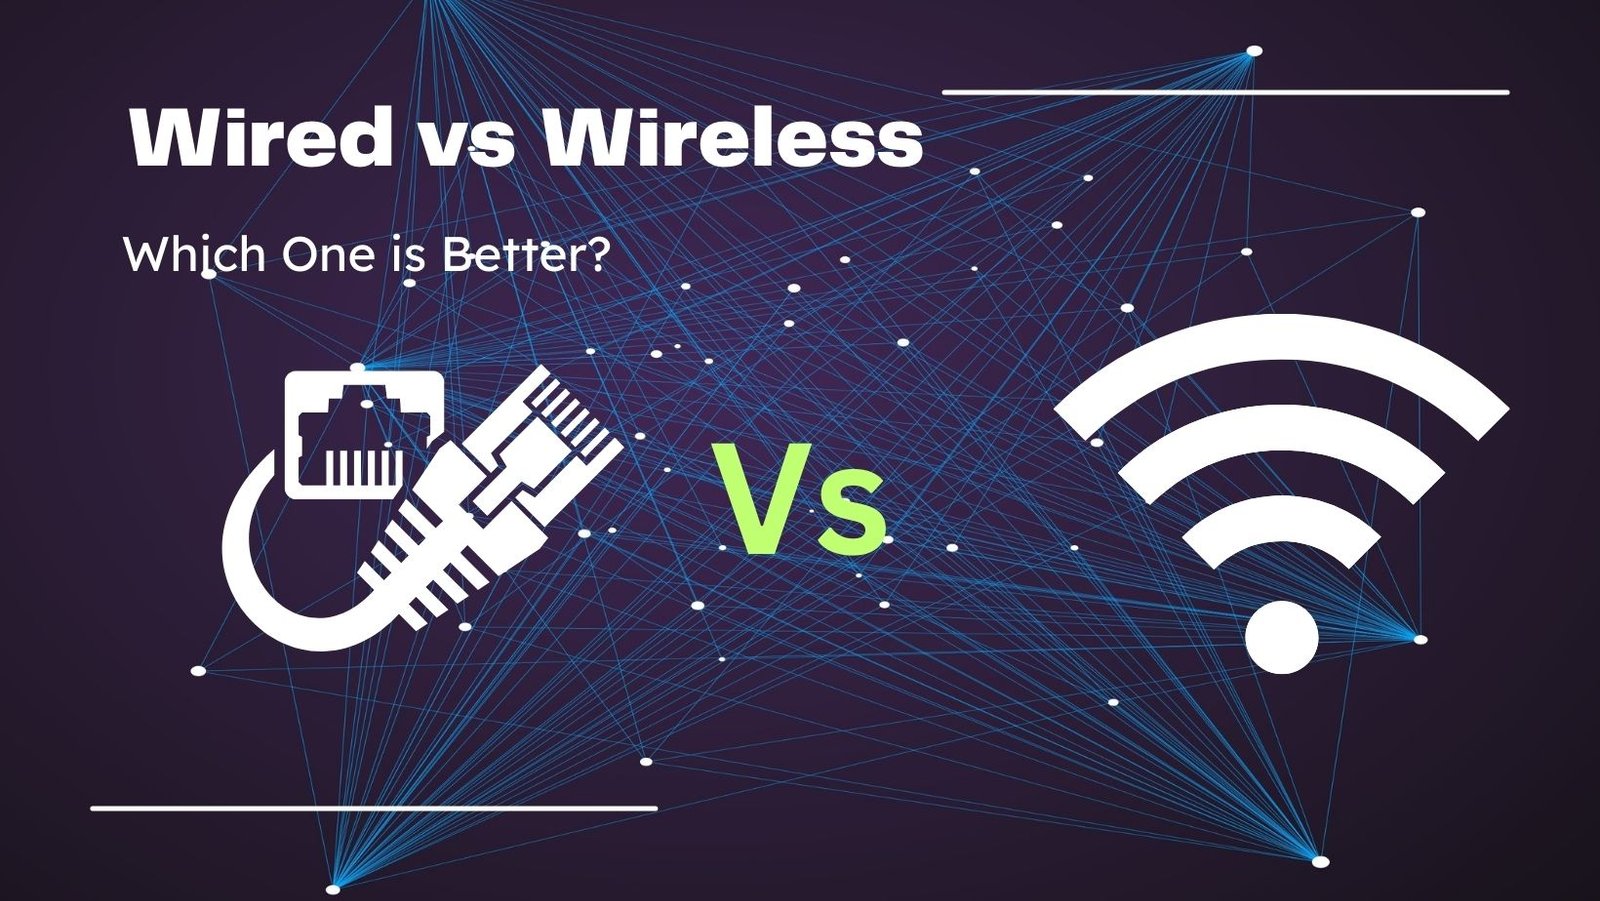 Wireless vs. Wired Networks: Which is Better?